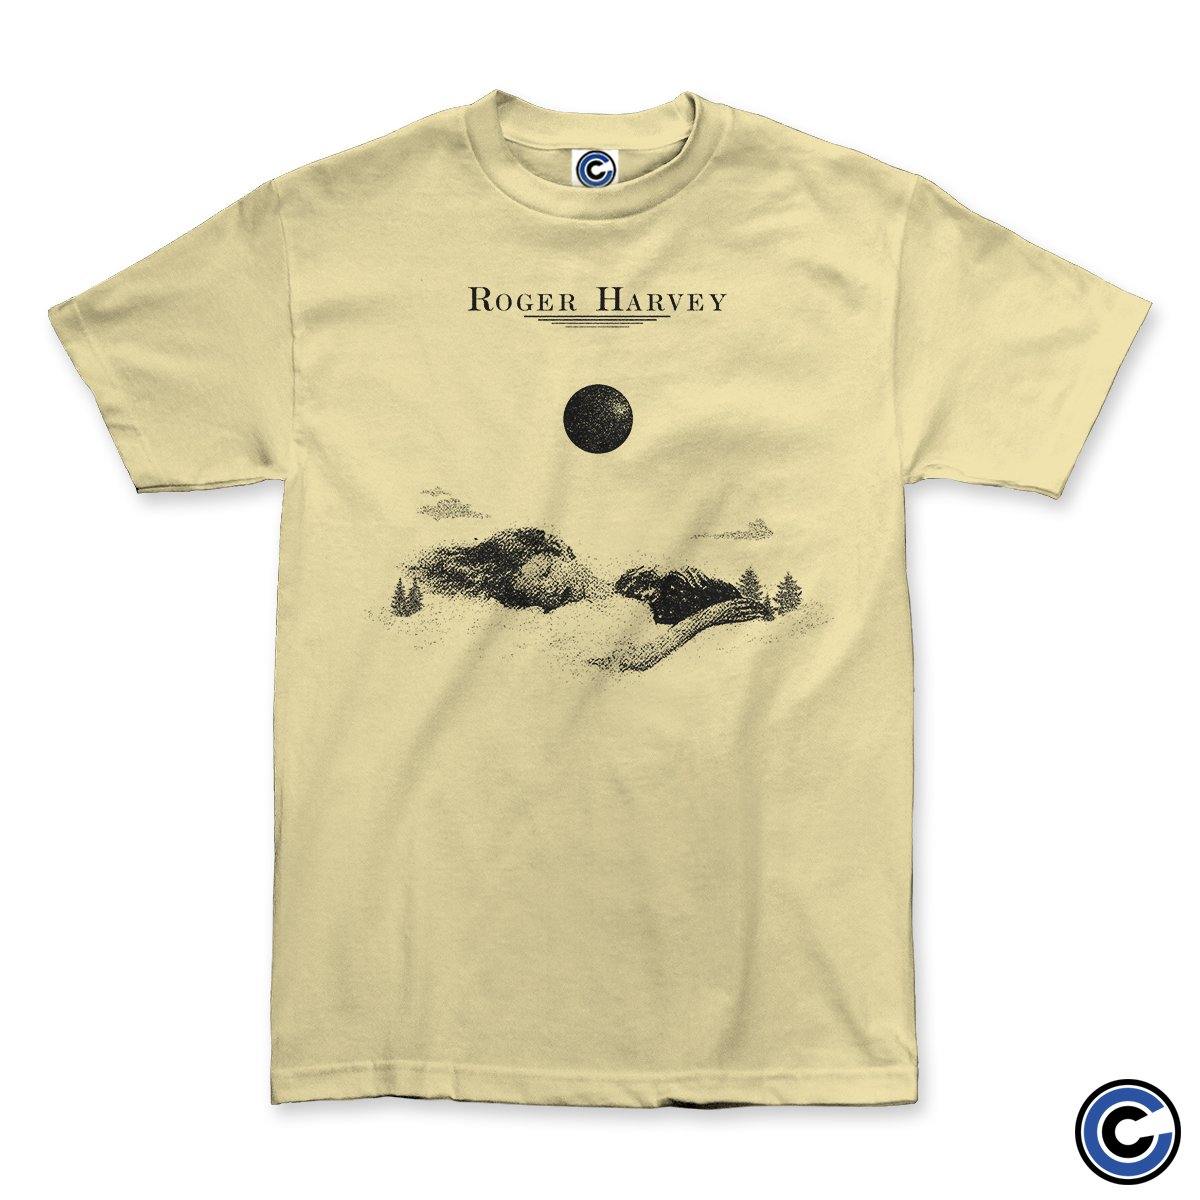 Buy – Roger Harvey "Two Coyotes" Shirt – Band & Music Merch – Cold Cuts Merch